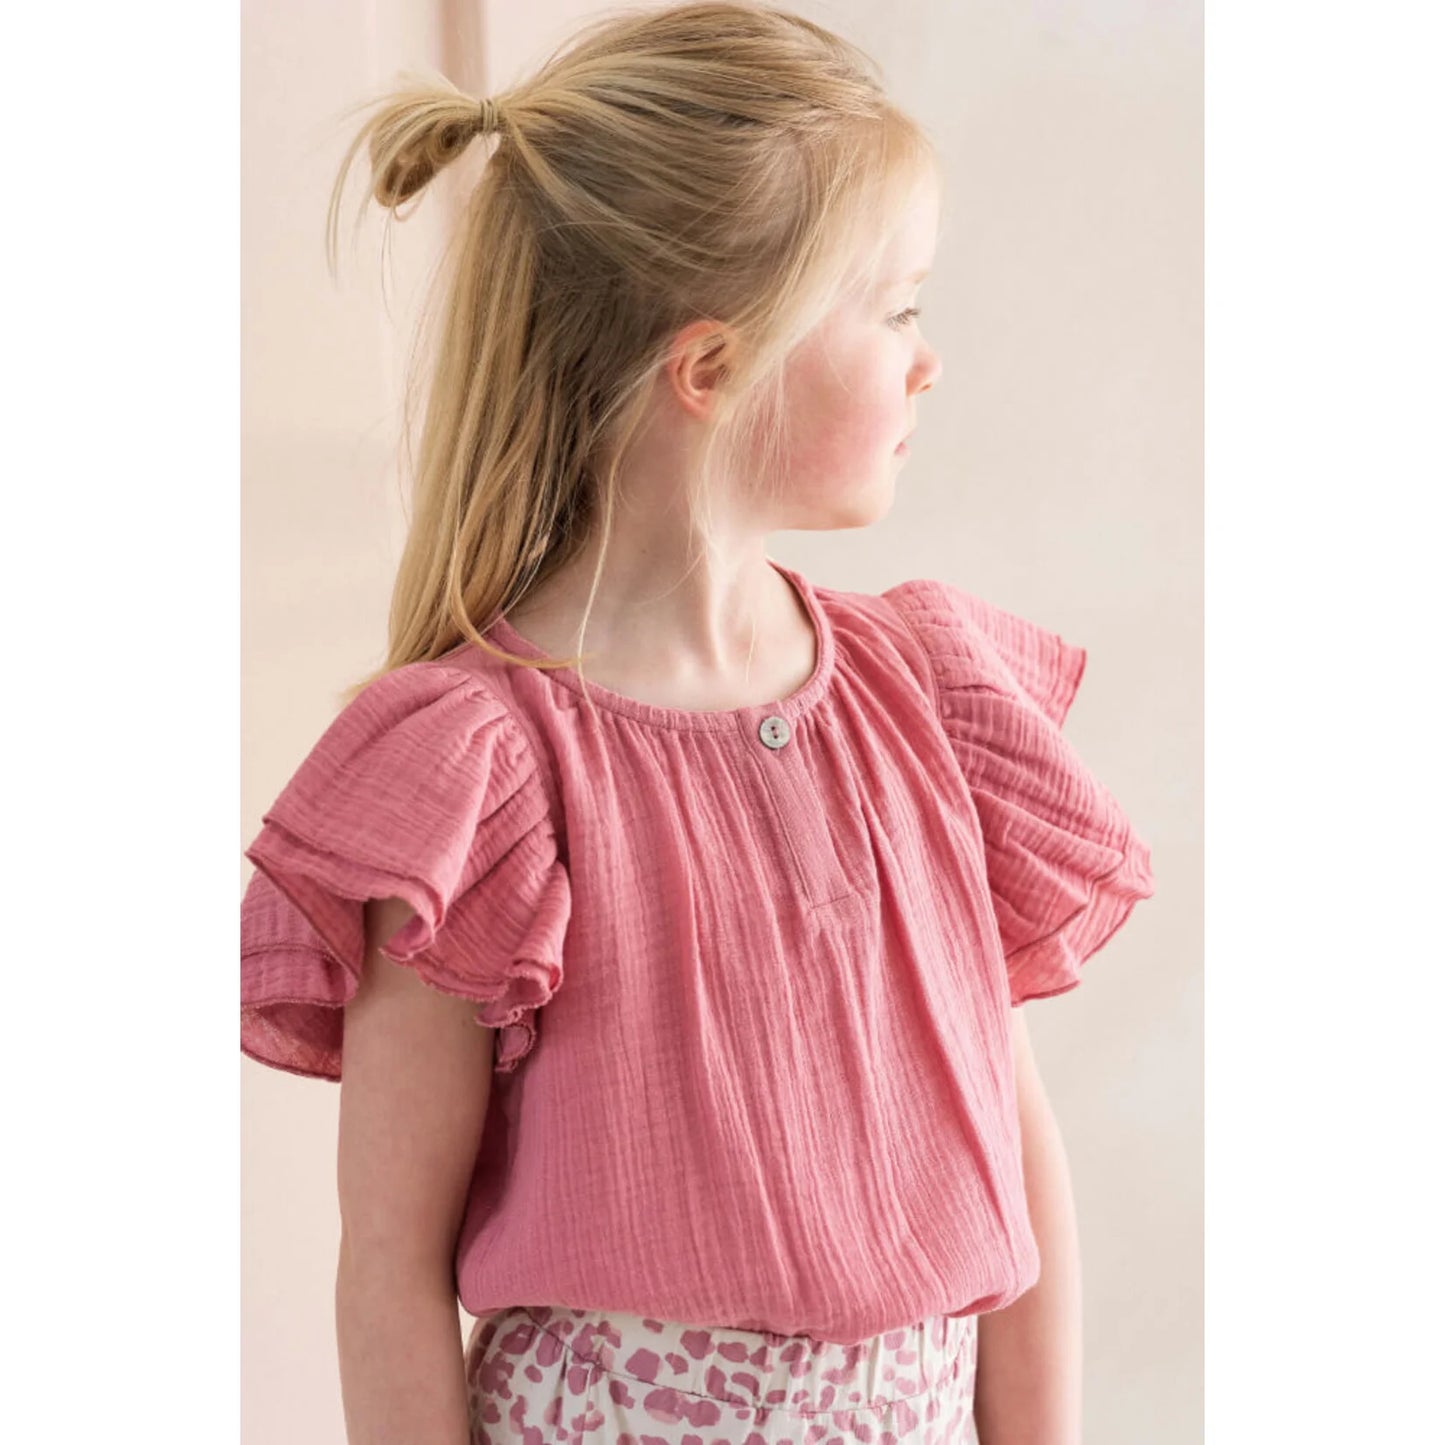 House of jamie - Butterfly Top - Blush